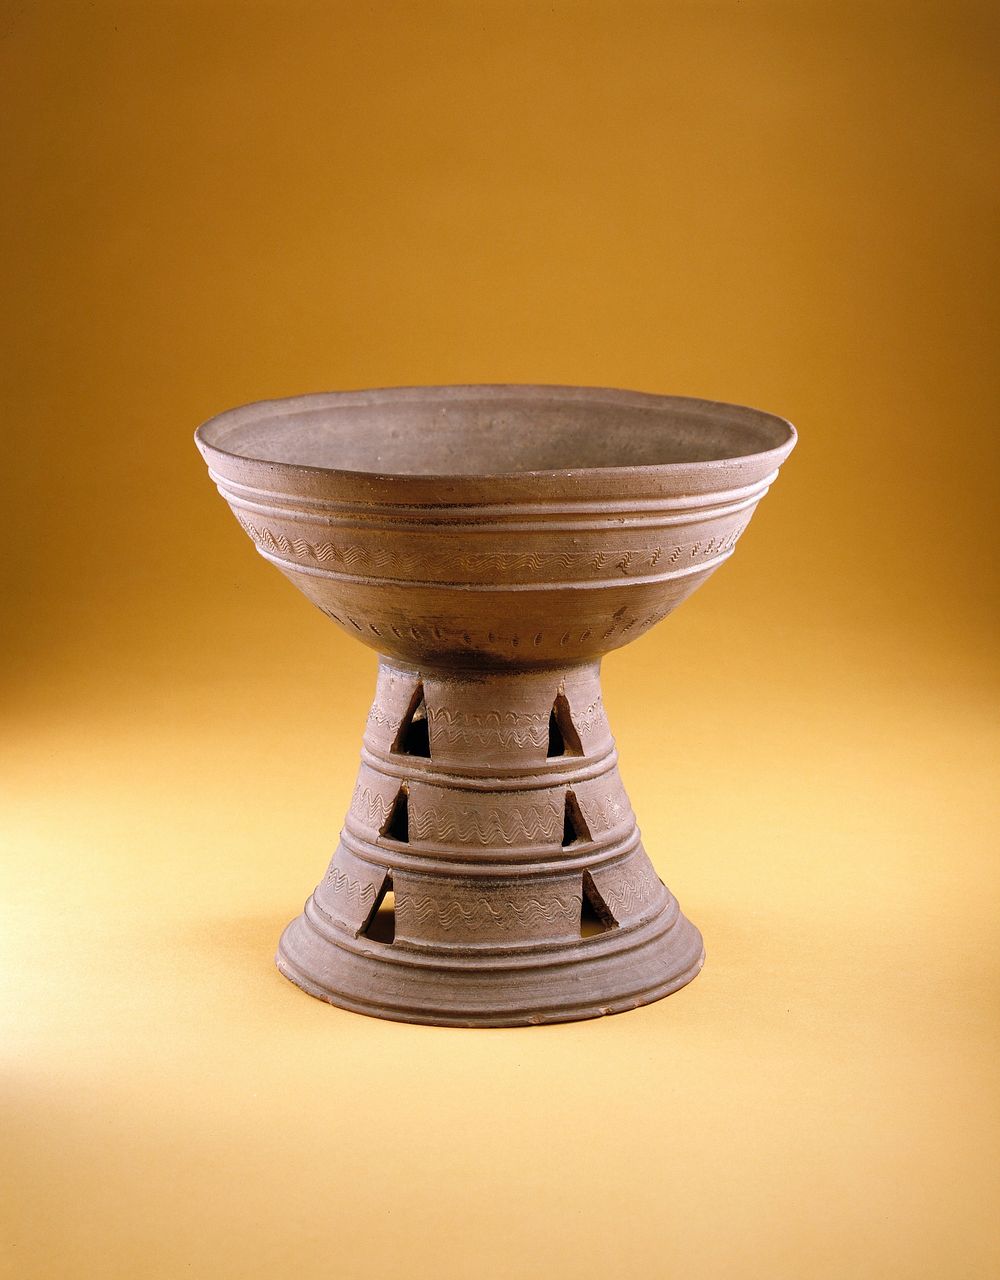 Bowl on Pierced Foot. Original from the Minneapolis Institute of Art.